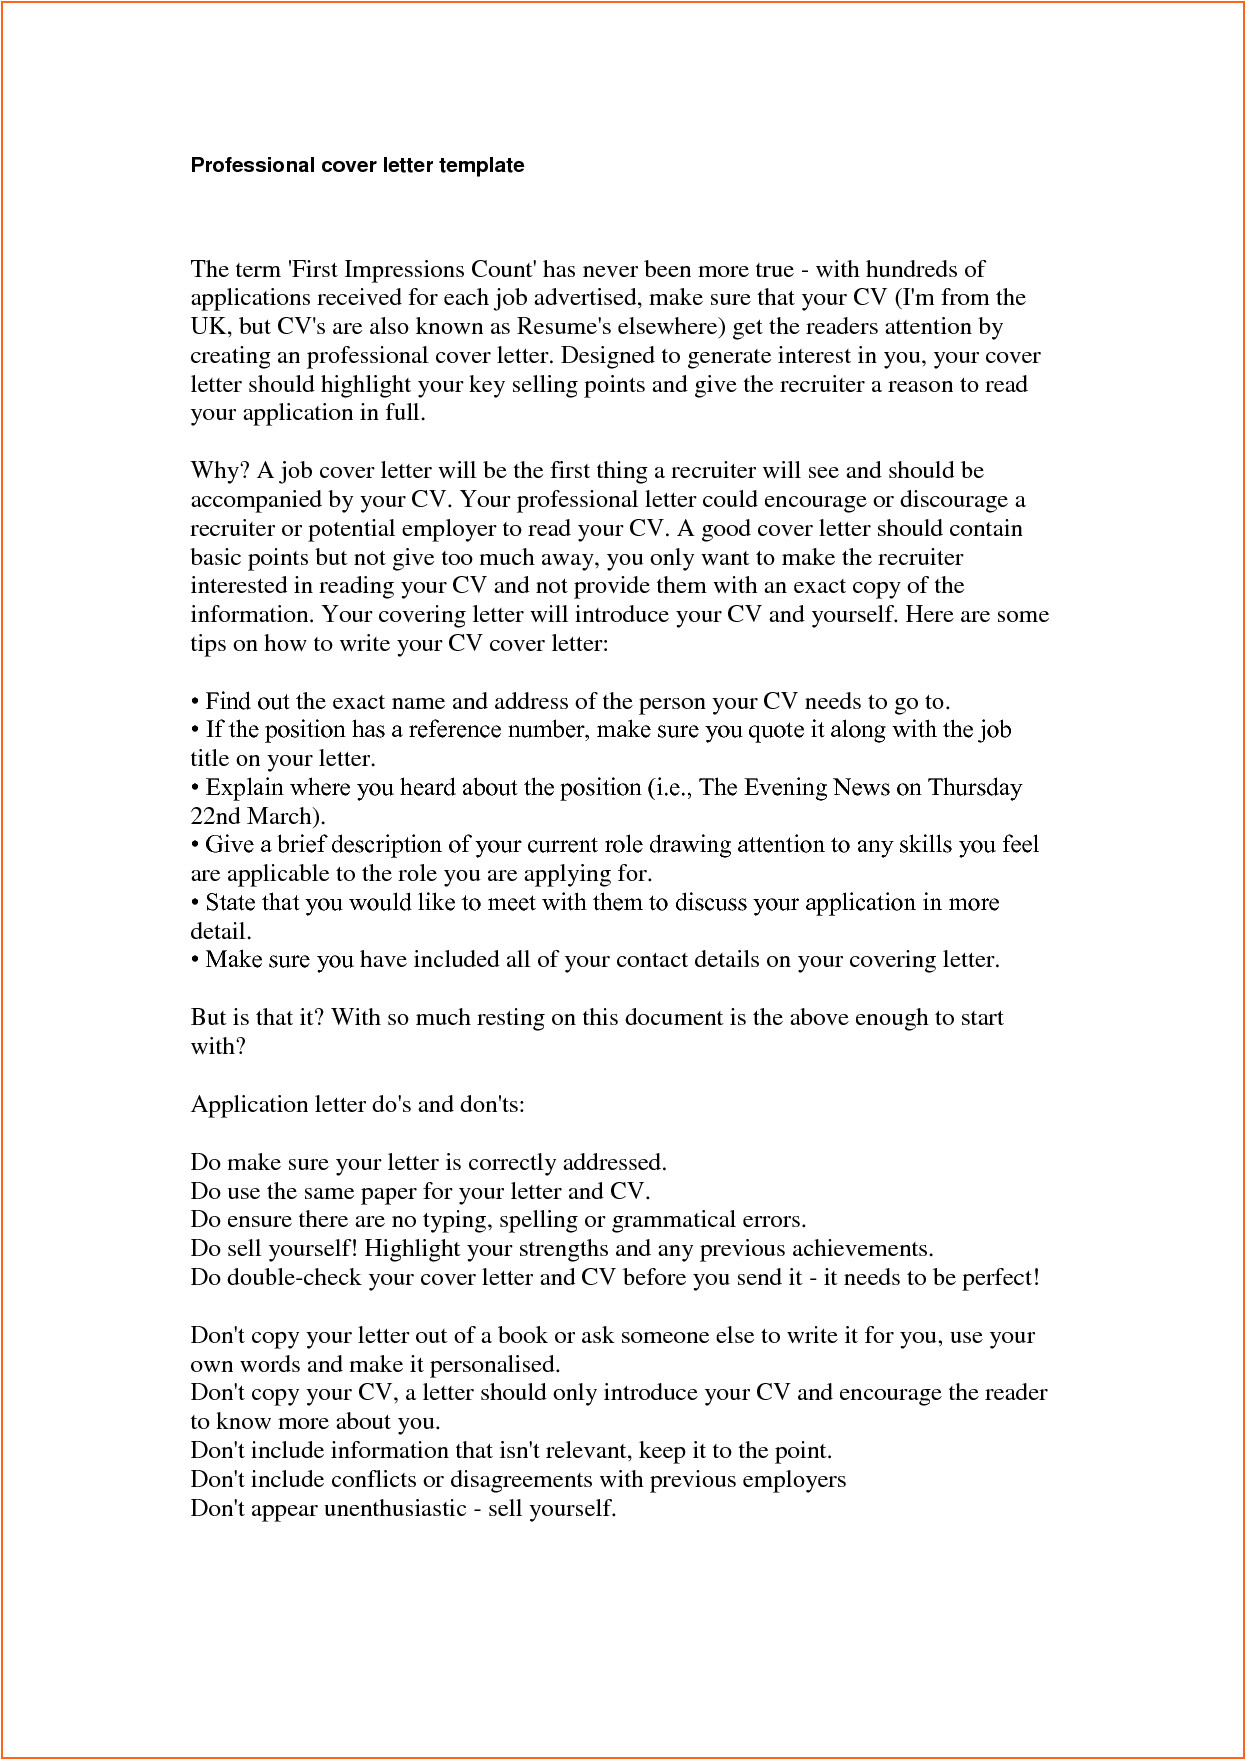 8 professional cover letter